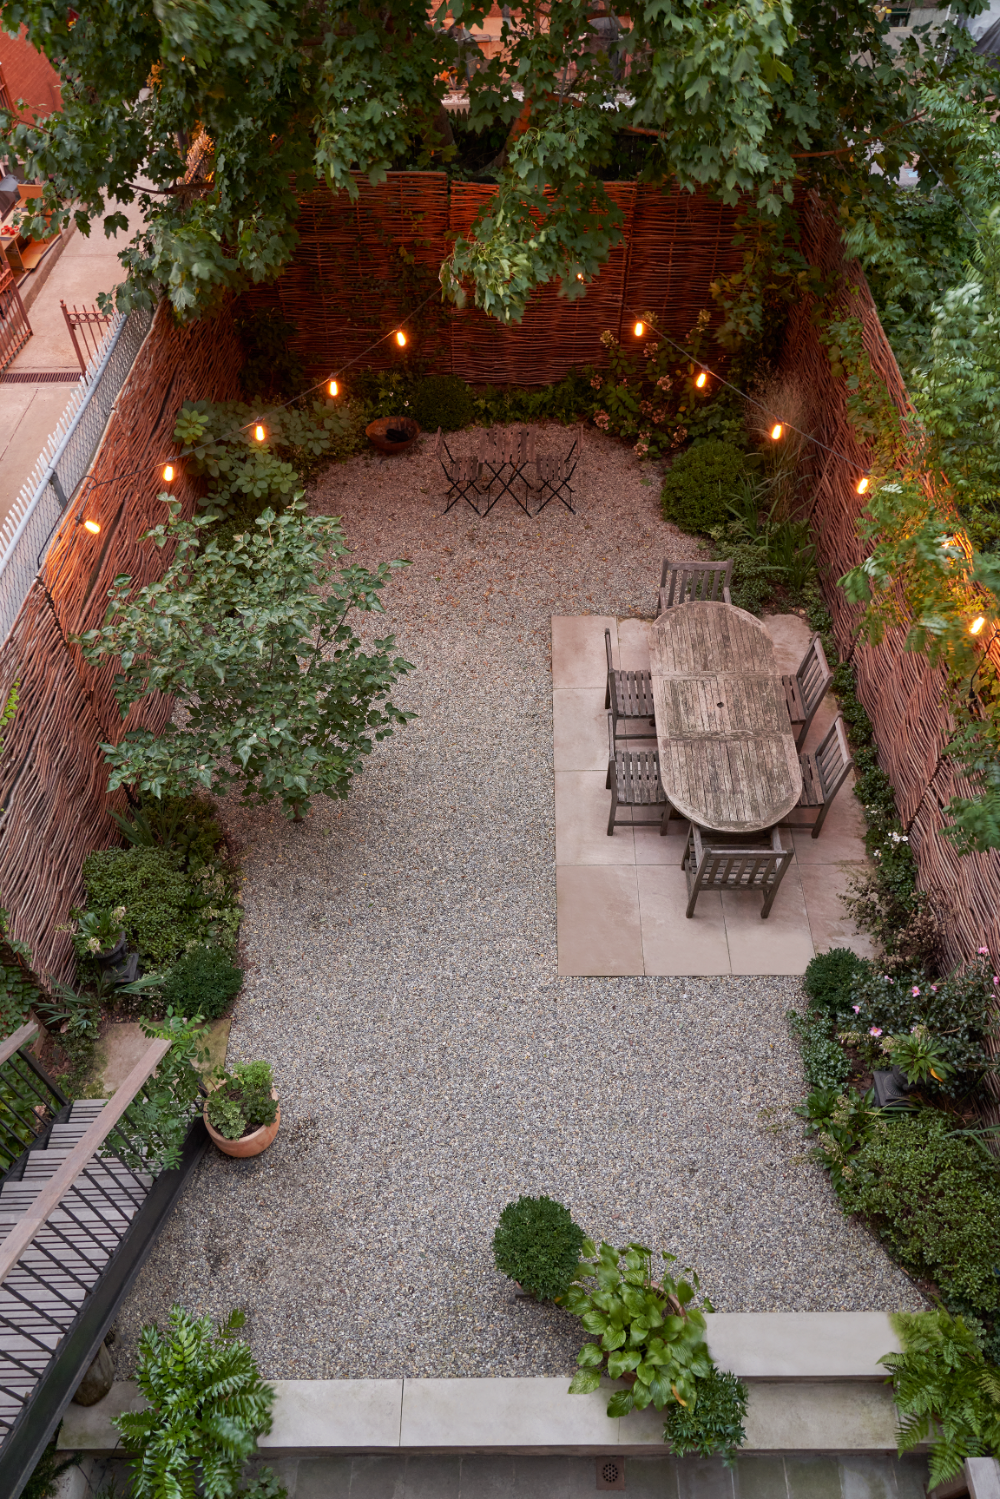 Create a Stunning Outdoor Living Space with a Beautifully Designed Garden Patio